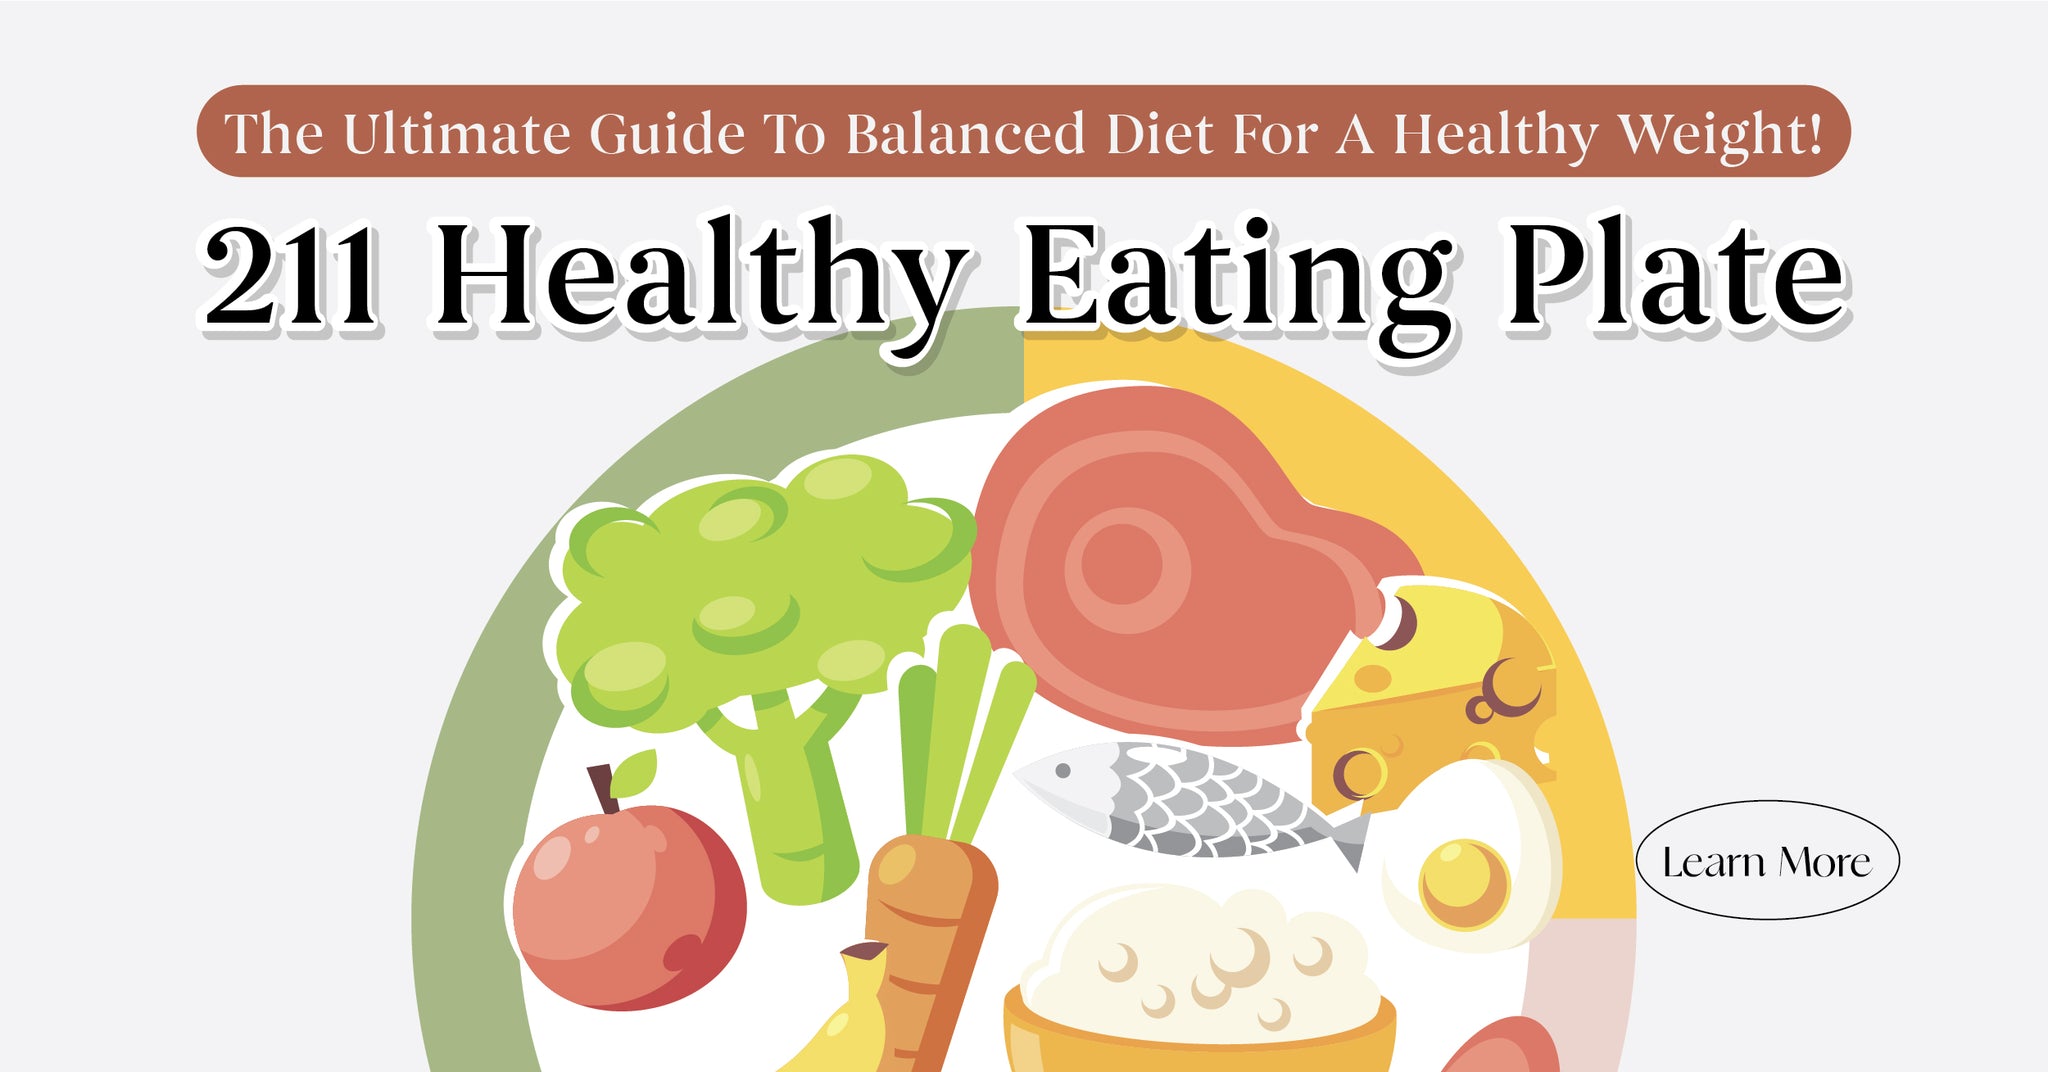 211 Healthy Eating Plate: The Ultimate Guide To A Balanced Diet For A Healthy Weight!